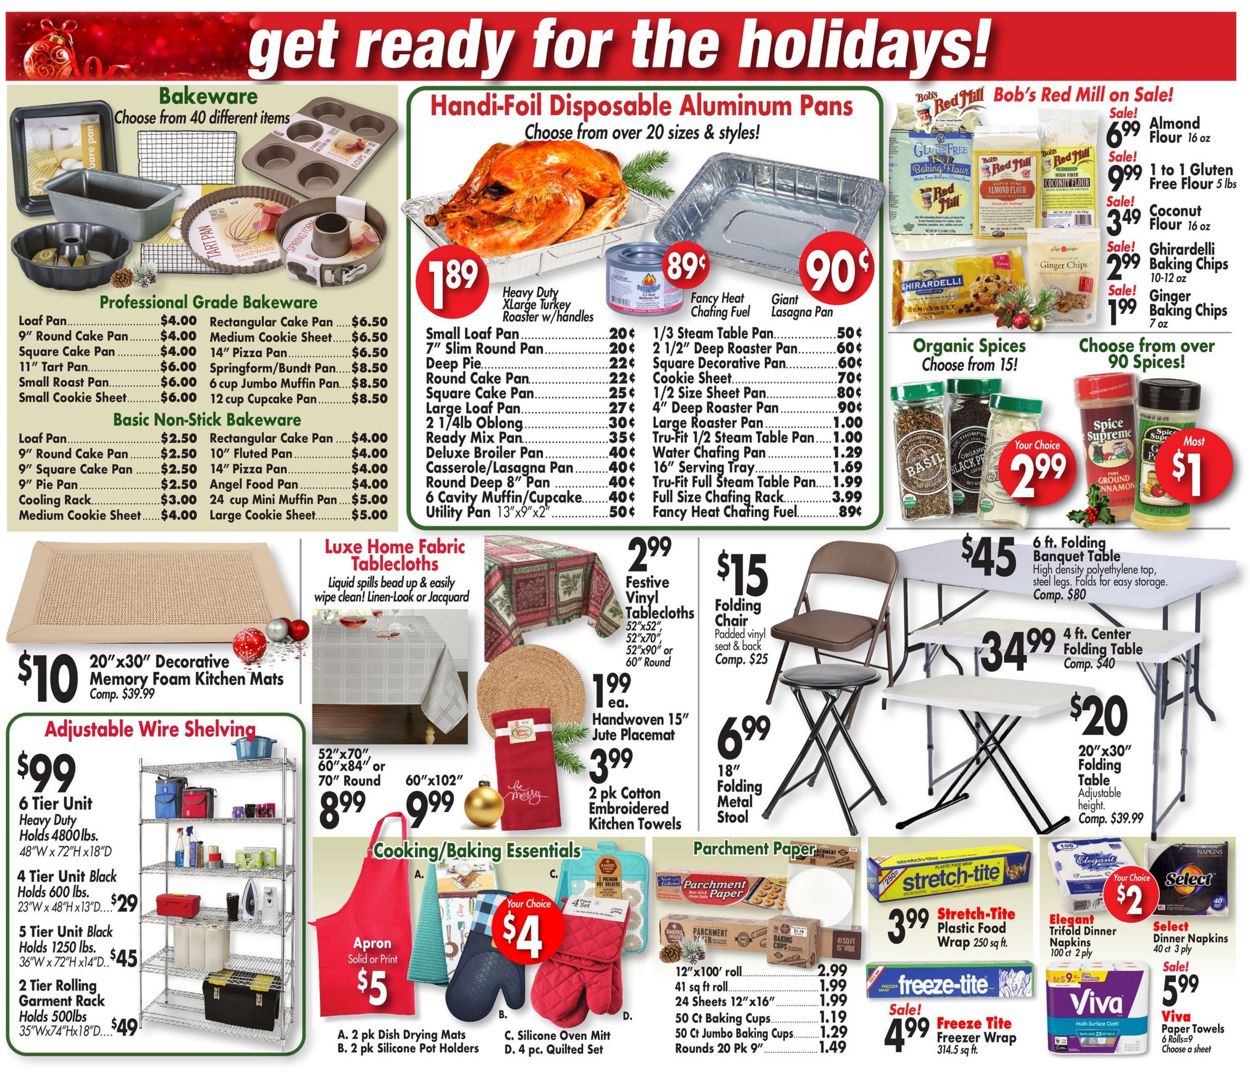 Ocean State Job Lot Holidays Ad 2019 Current weekly ad